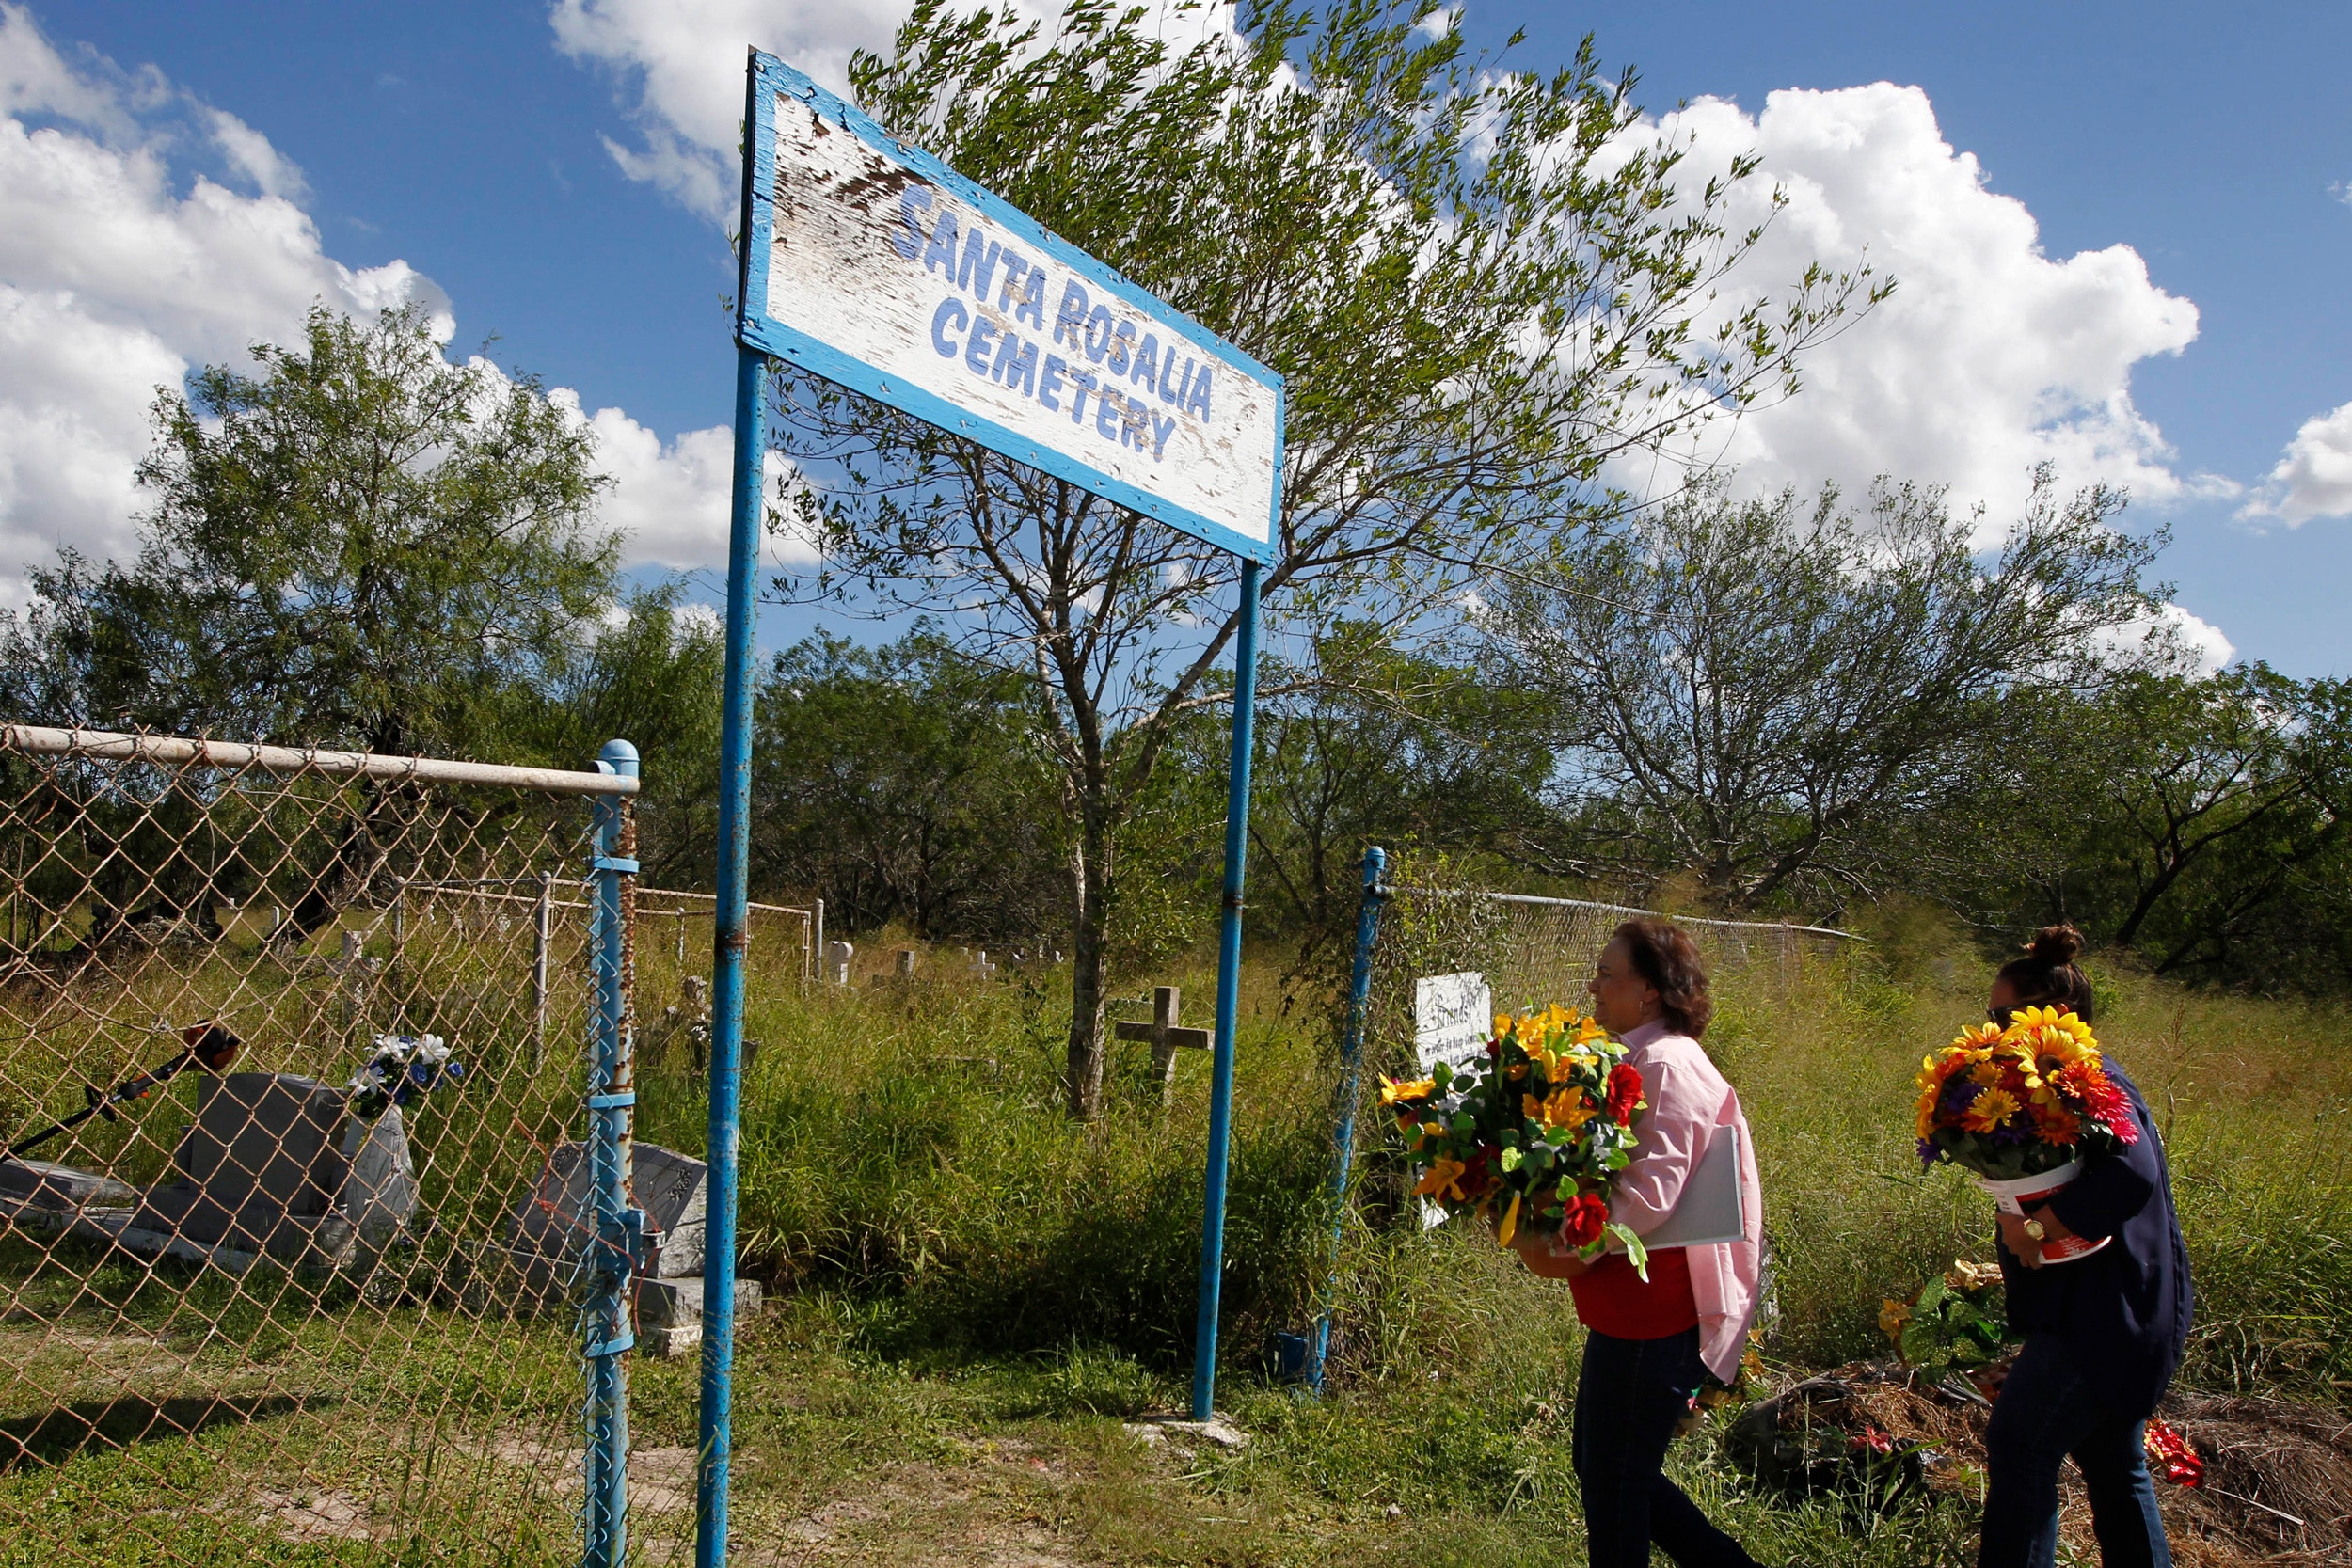 Estela Aguilar Hernandez, left, and her daughter Cecilia Hernandez carry flowers for the graves of deceased relatives into the Santa Rosalia Cemetery on Tuesday, Oct. 24, 2017, in Brownsville, Texas. Hernandez' grandparents and many other relatives are buried at the cemetery, which is located south of the border wall just north of the Rio Grande. Hernandez fears last year's approval of border gate funding will limit access to the cemetery.  (Nathan Lambrecht/The Monitor via AP)